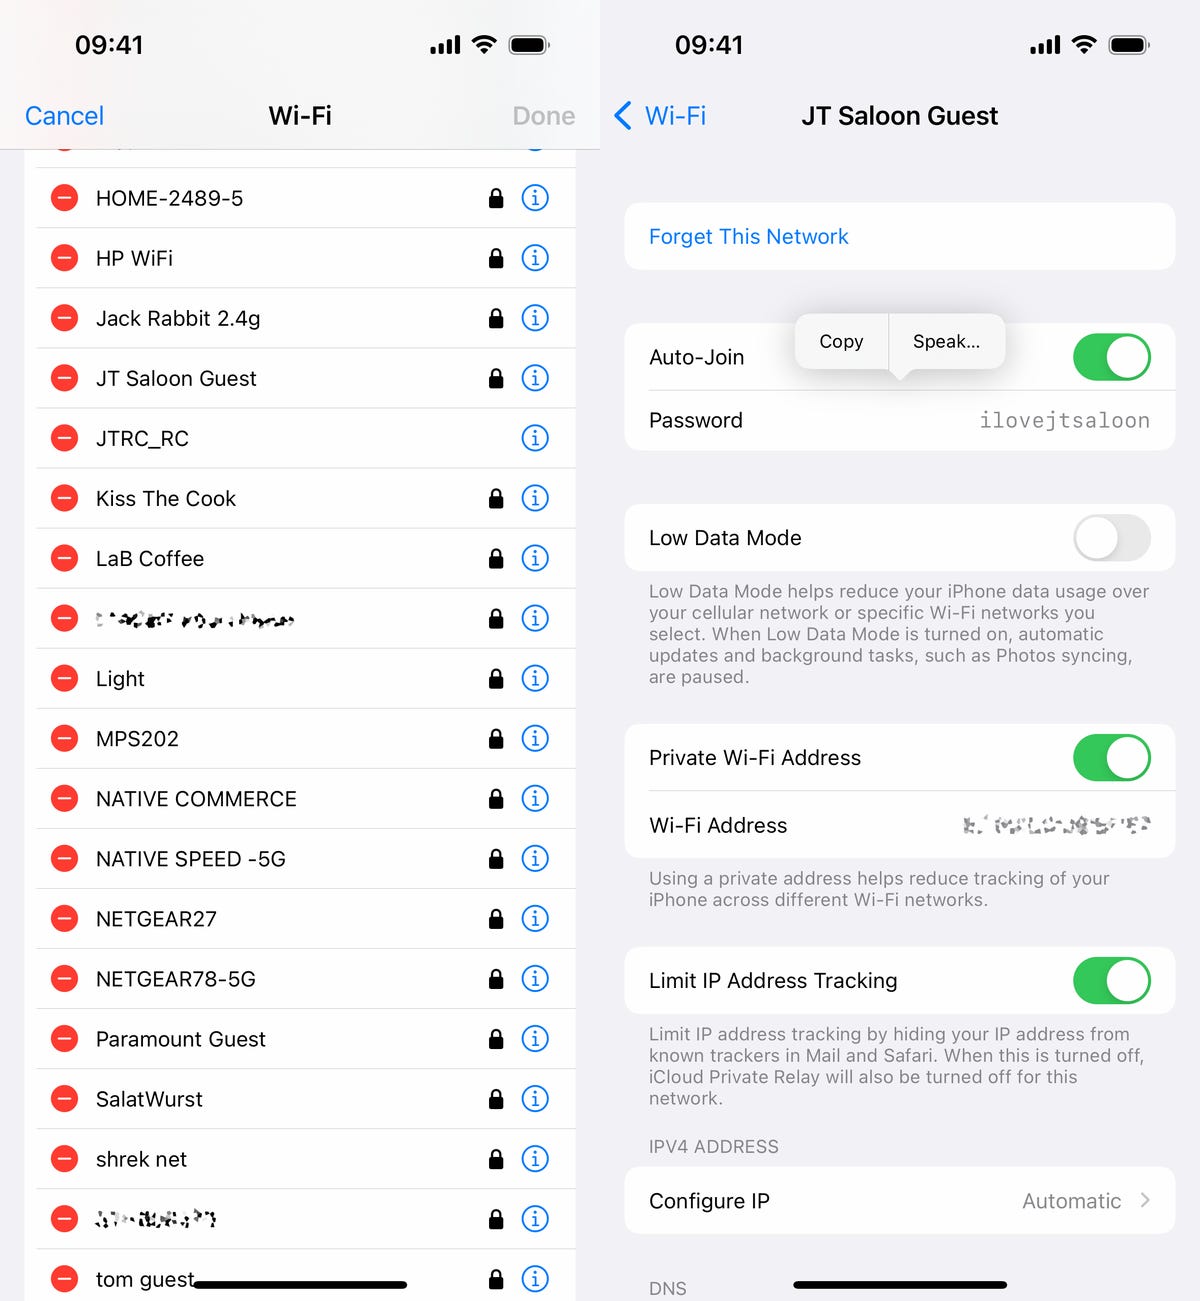 Saved Wi-Fi passwords in iOS settings